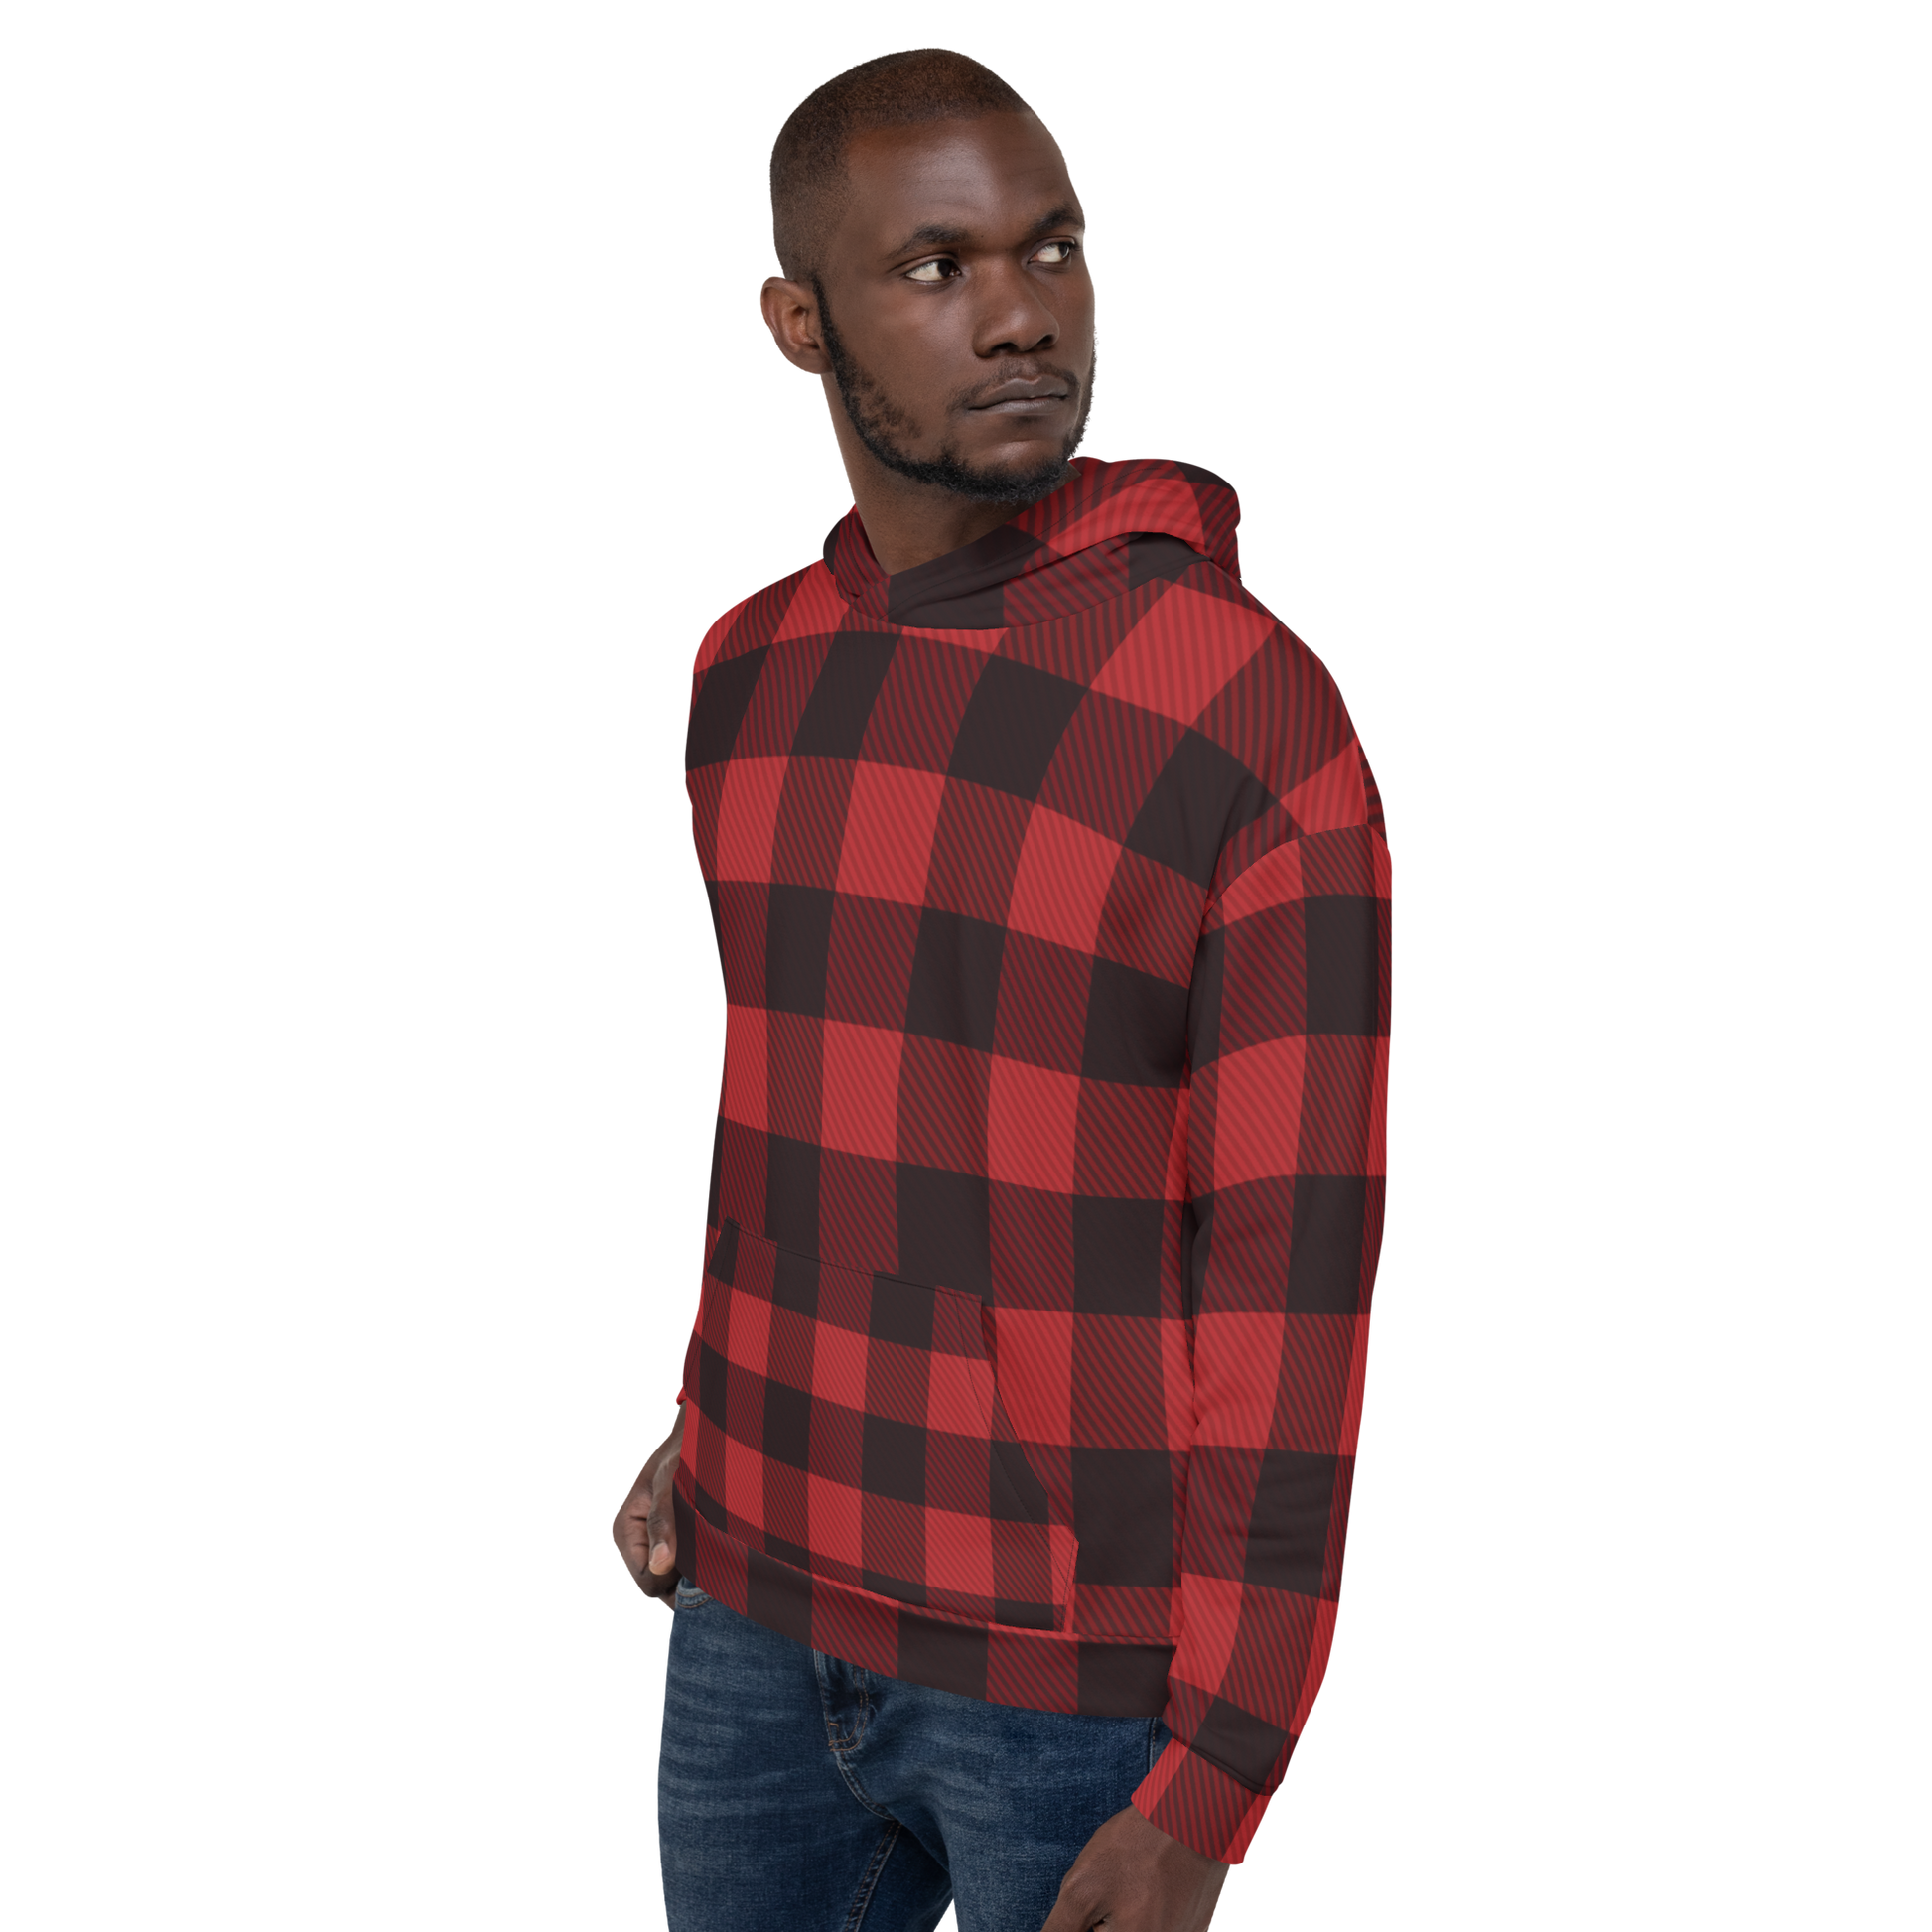 Unisex Hoodie in red & black plaid - familiar...yet different